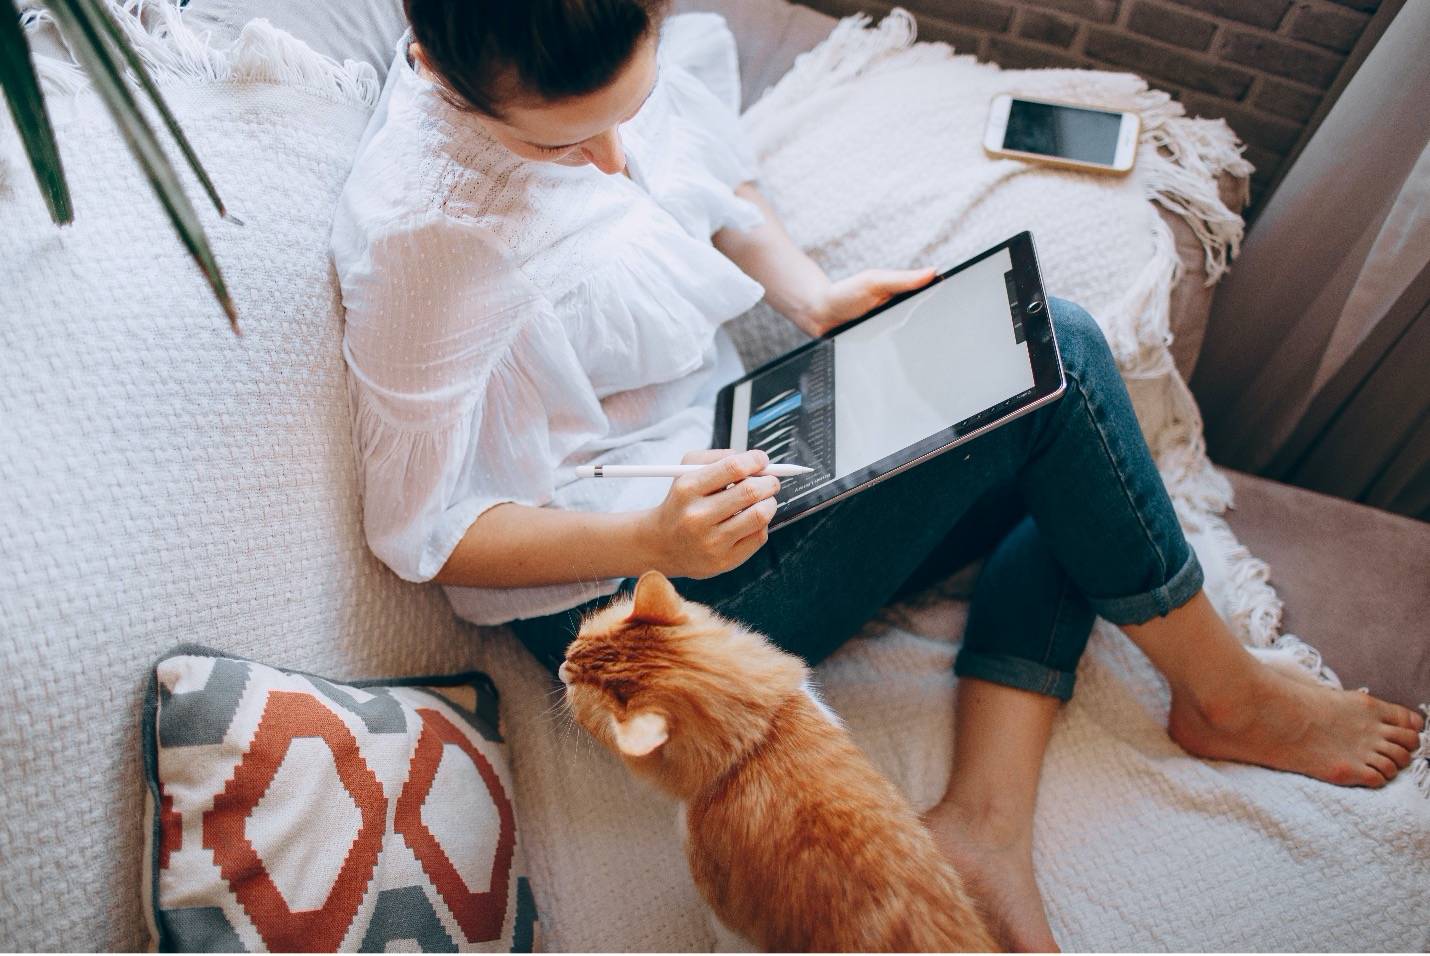 Women writing on her tablet while sitting on the couch next to her orange cat